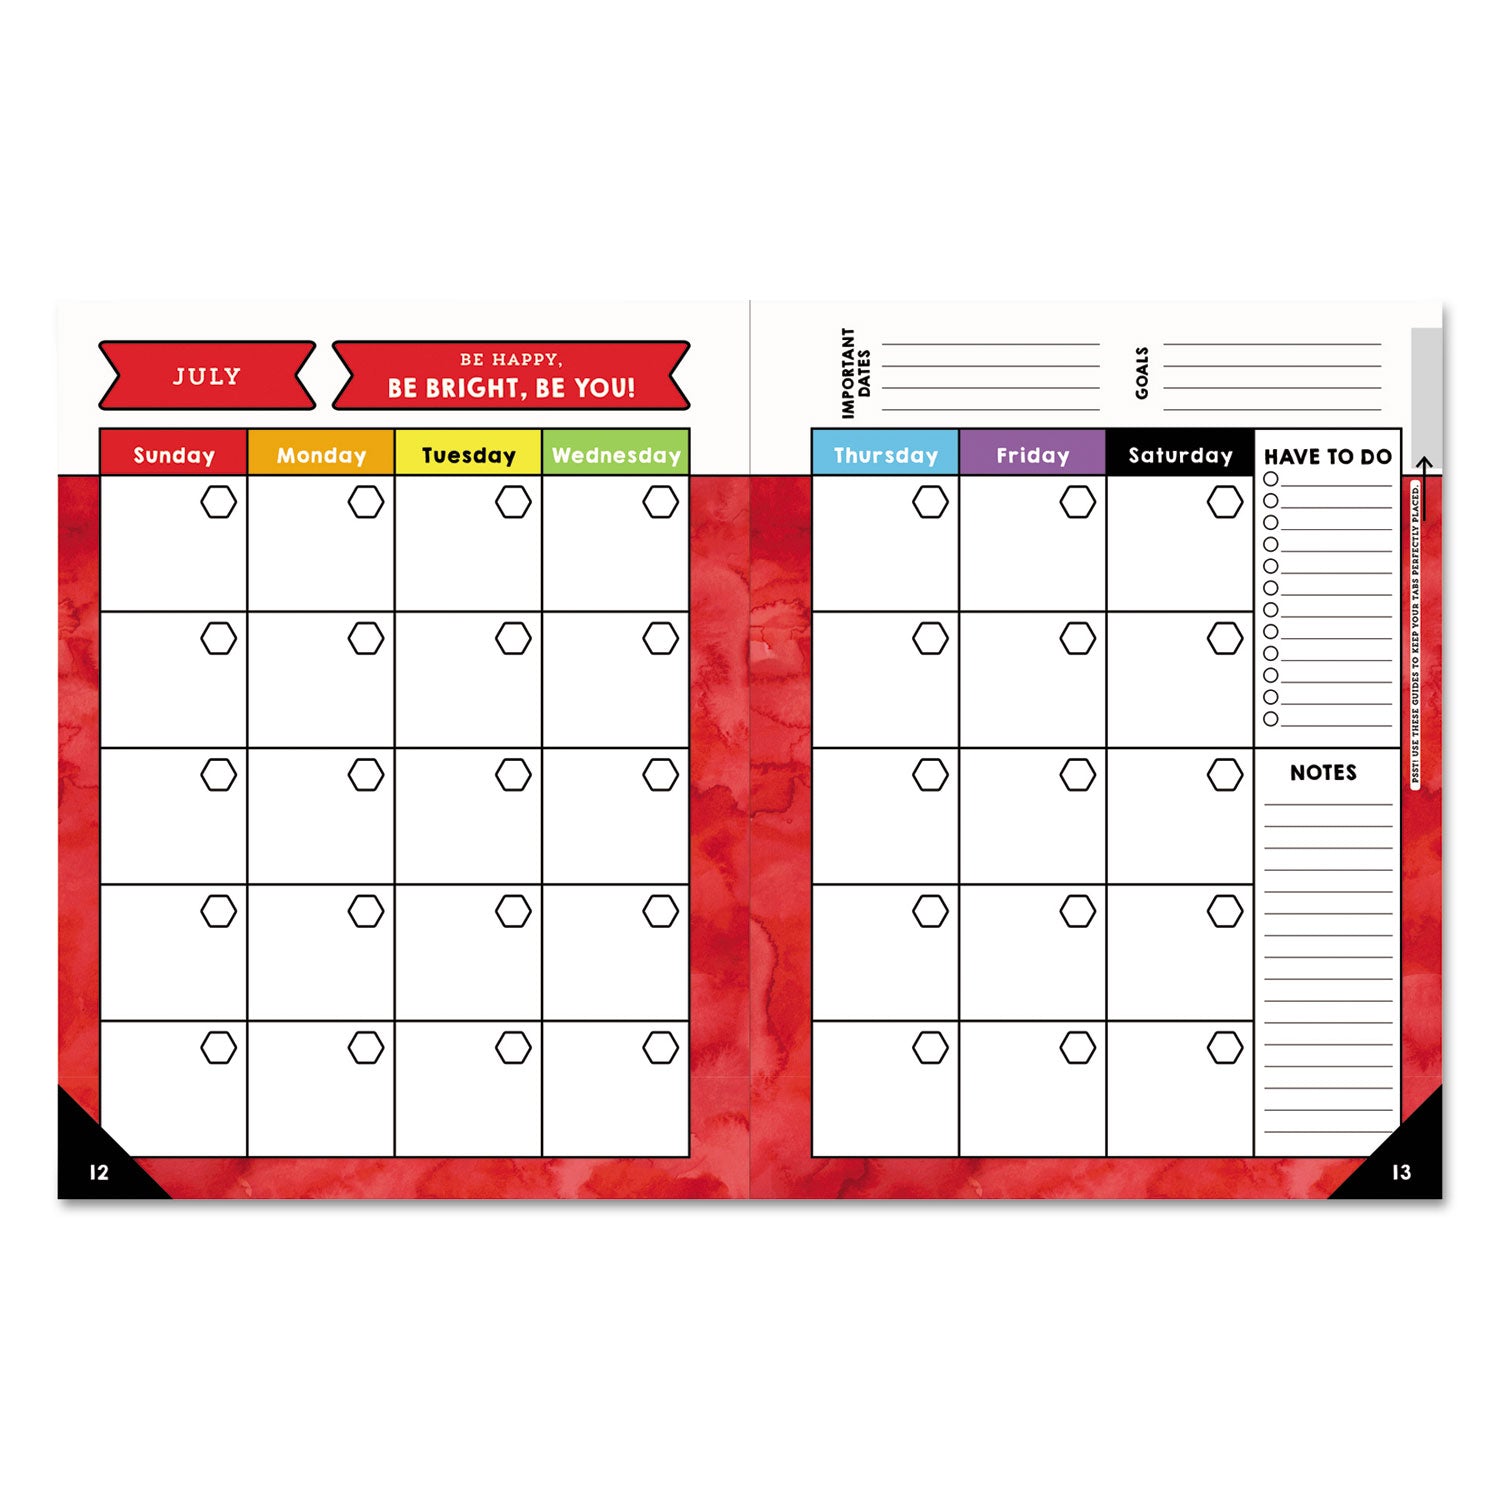 teacher-planner-weekly-monthly-two-page-spread-seven-classes-1088-x-838-balloon-theme-black-cover_cdp105000 - 2